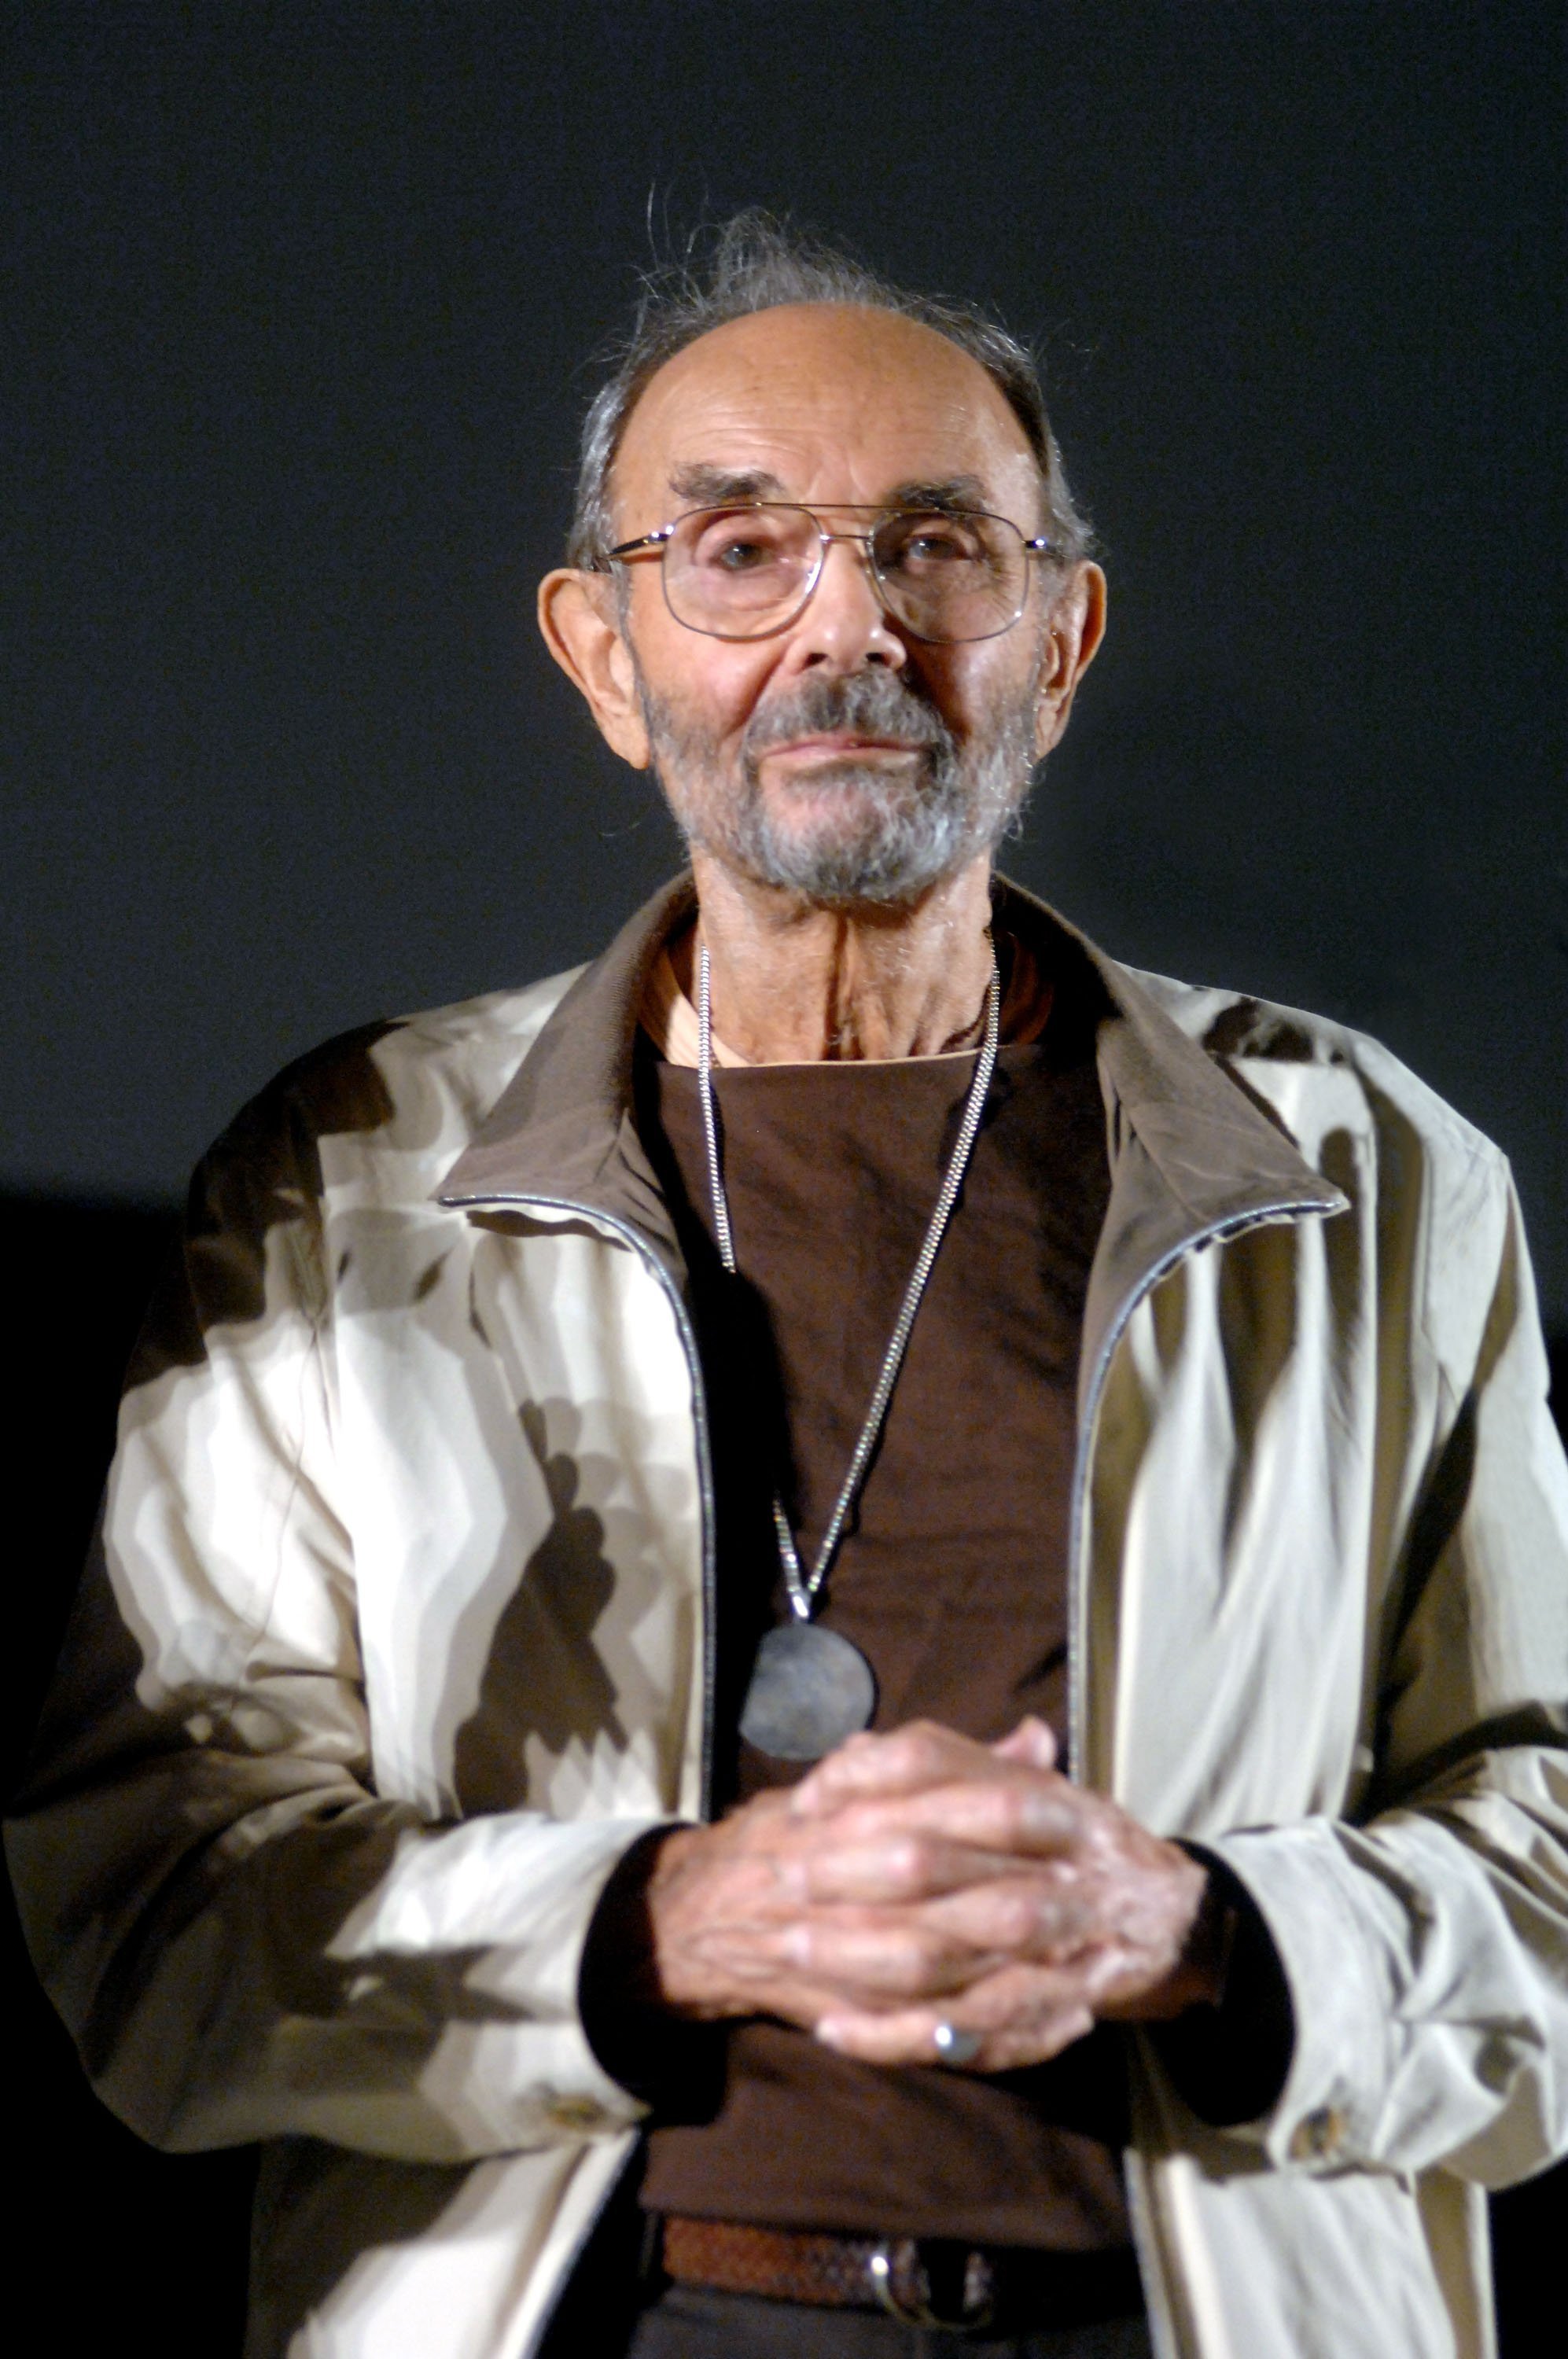 Stanley Donen prior to a viewing of "Singin' in the Rain" in Bologna, Italy | Photo: Getty Images